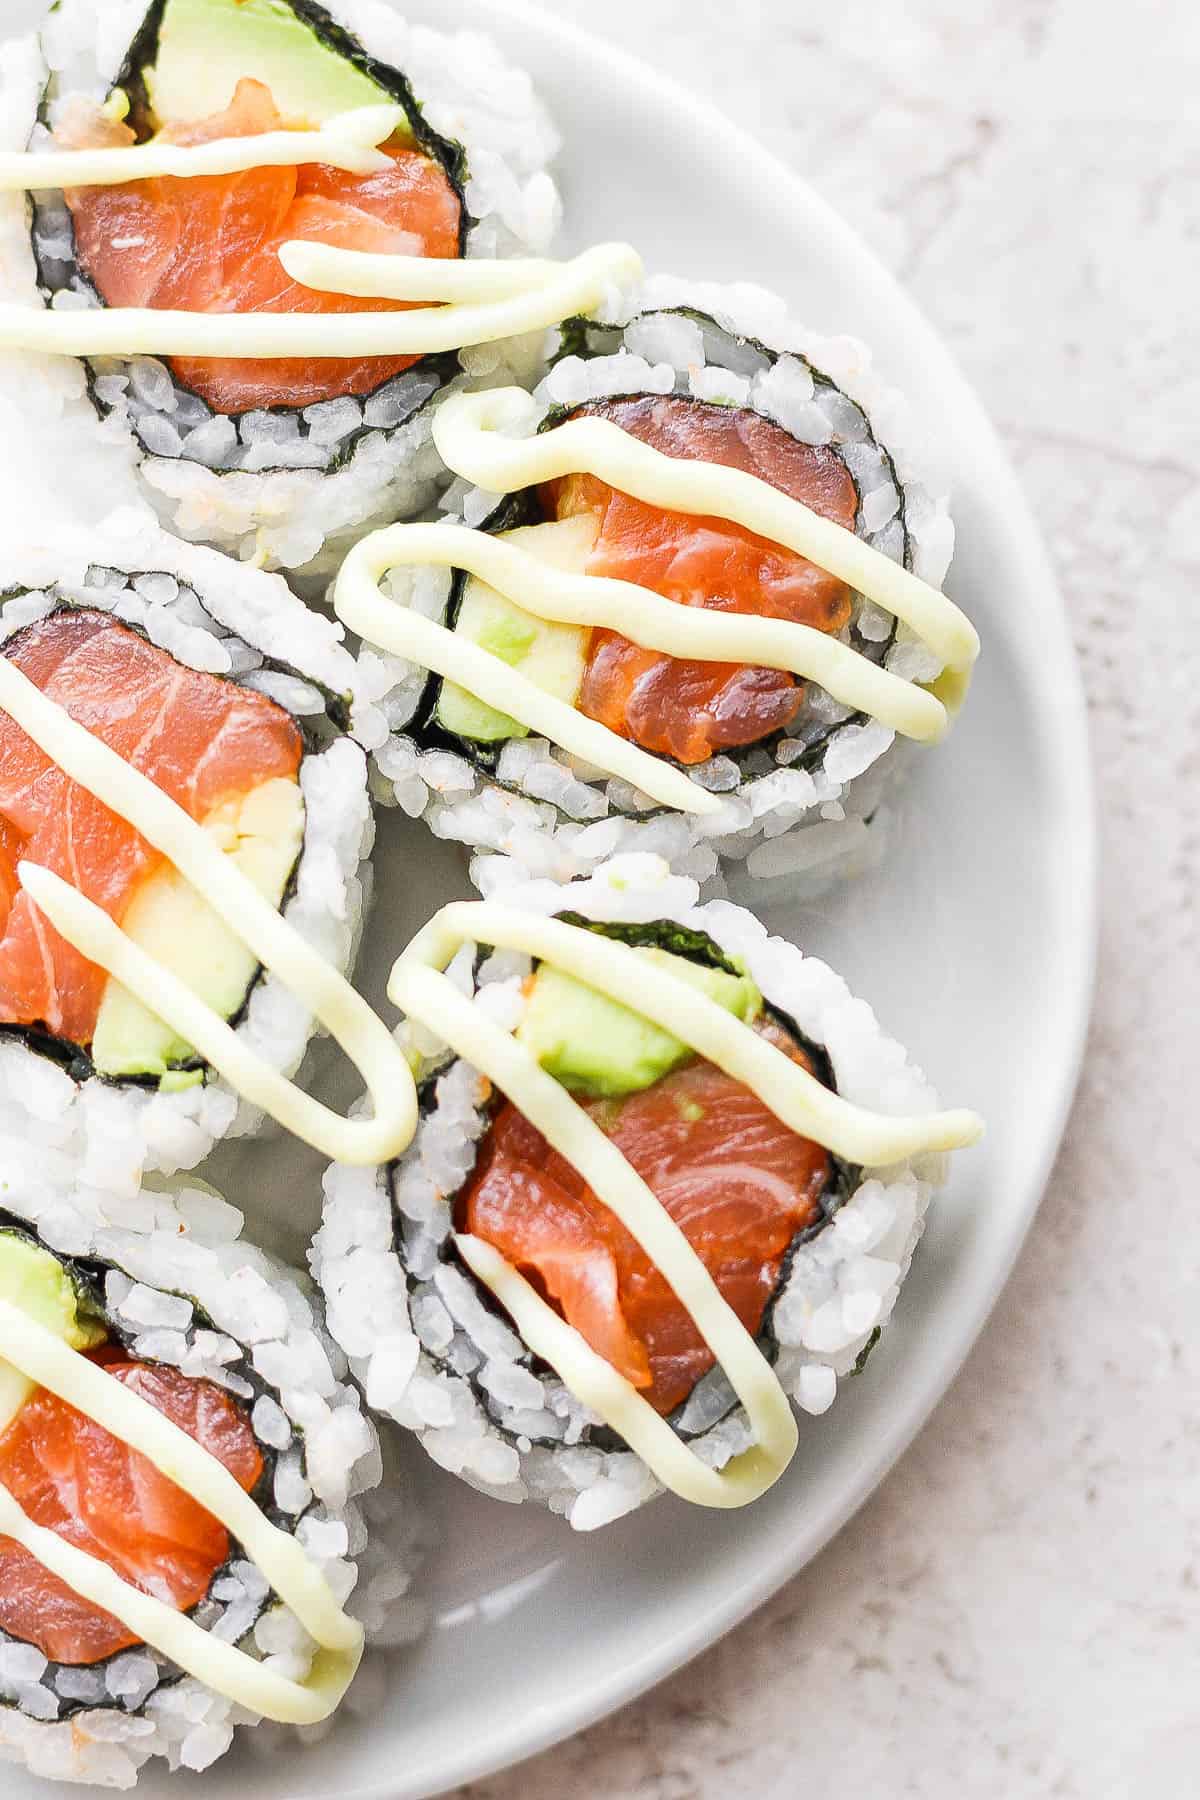 A salmon sushi roll with wasabi mayo on top.